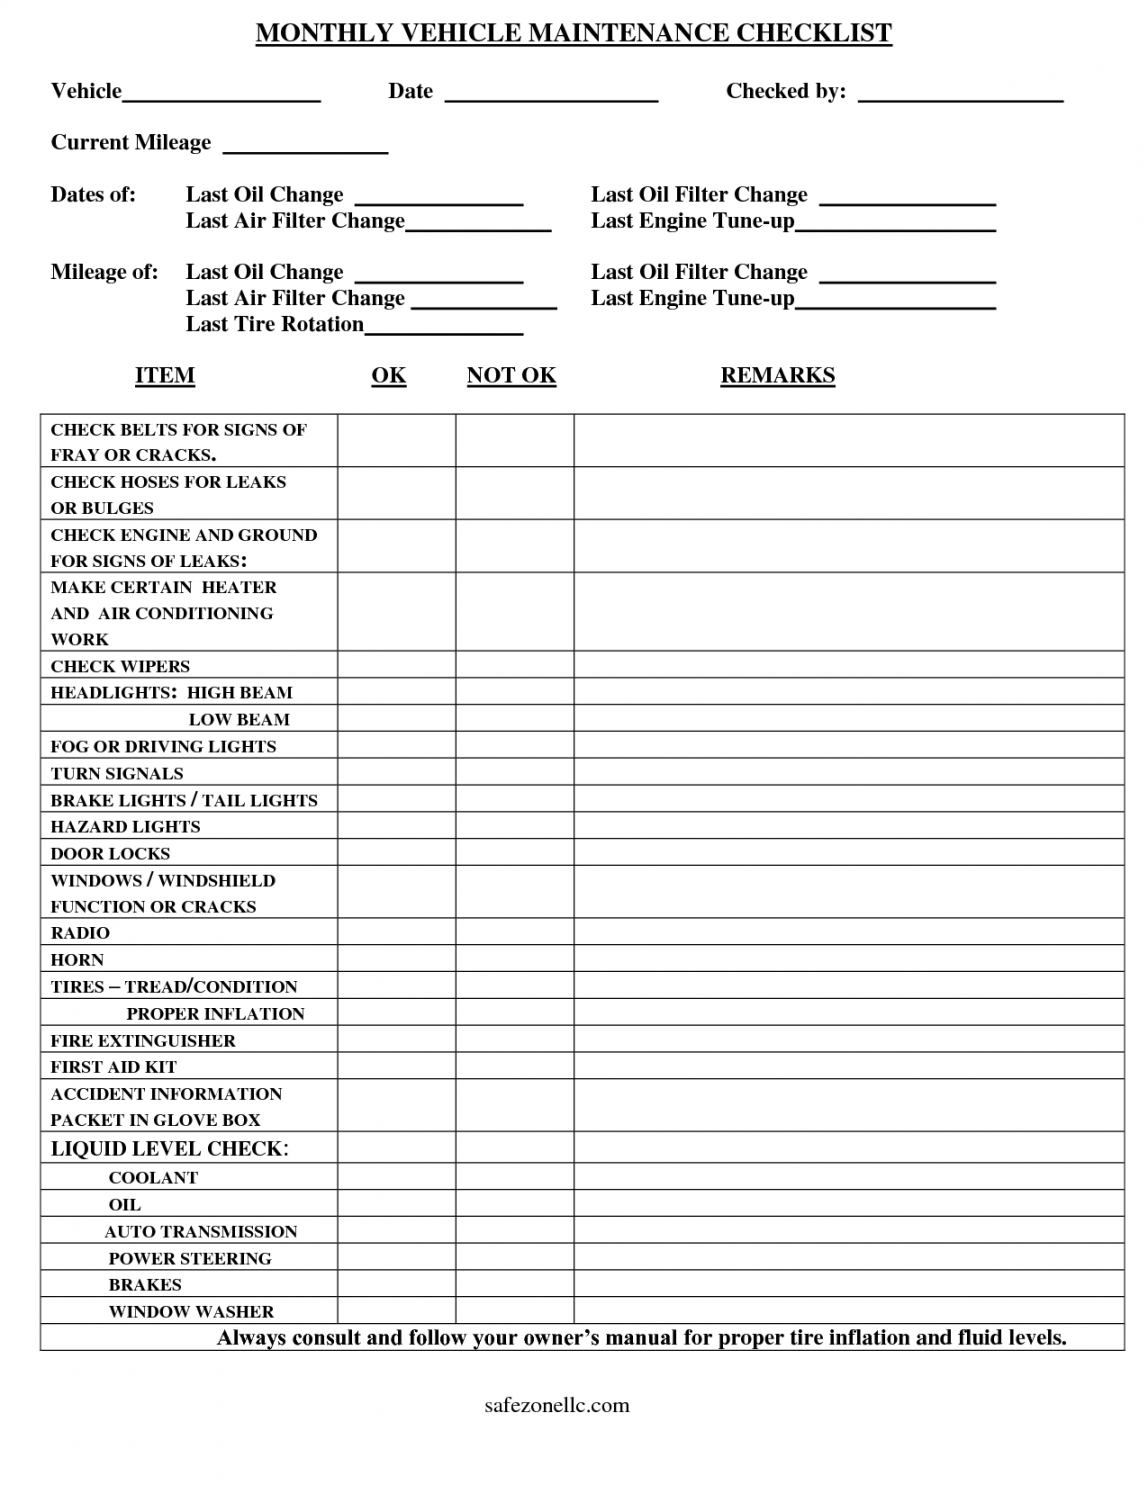 vehicle checklist template  monthly vehicle maintenance checklist auto service checklist template samples